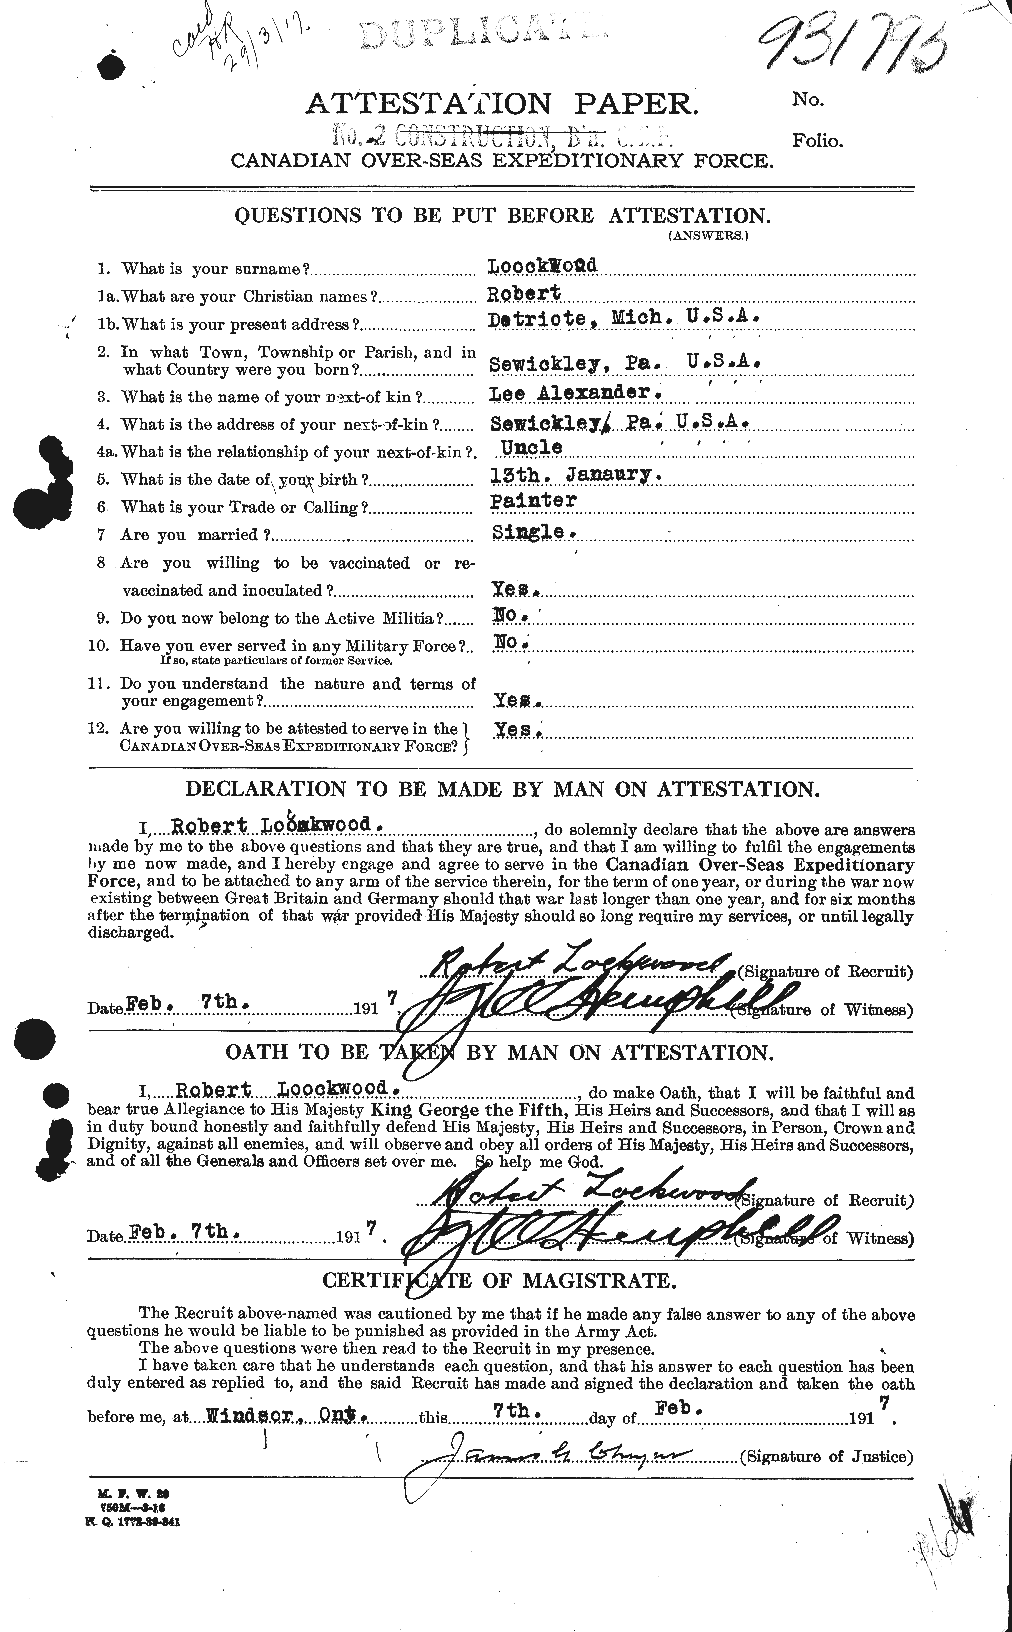 Personnel Records of the First World War - CEF 464736a